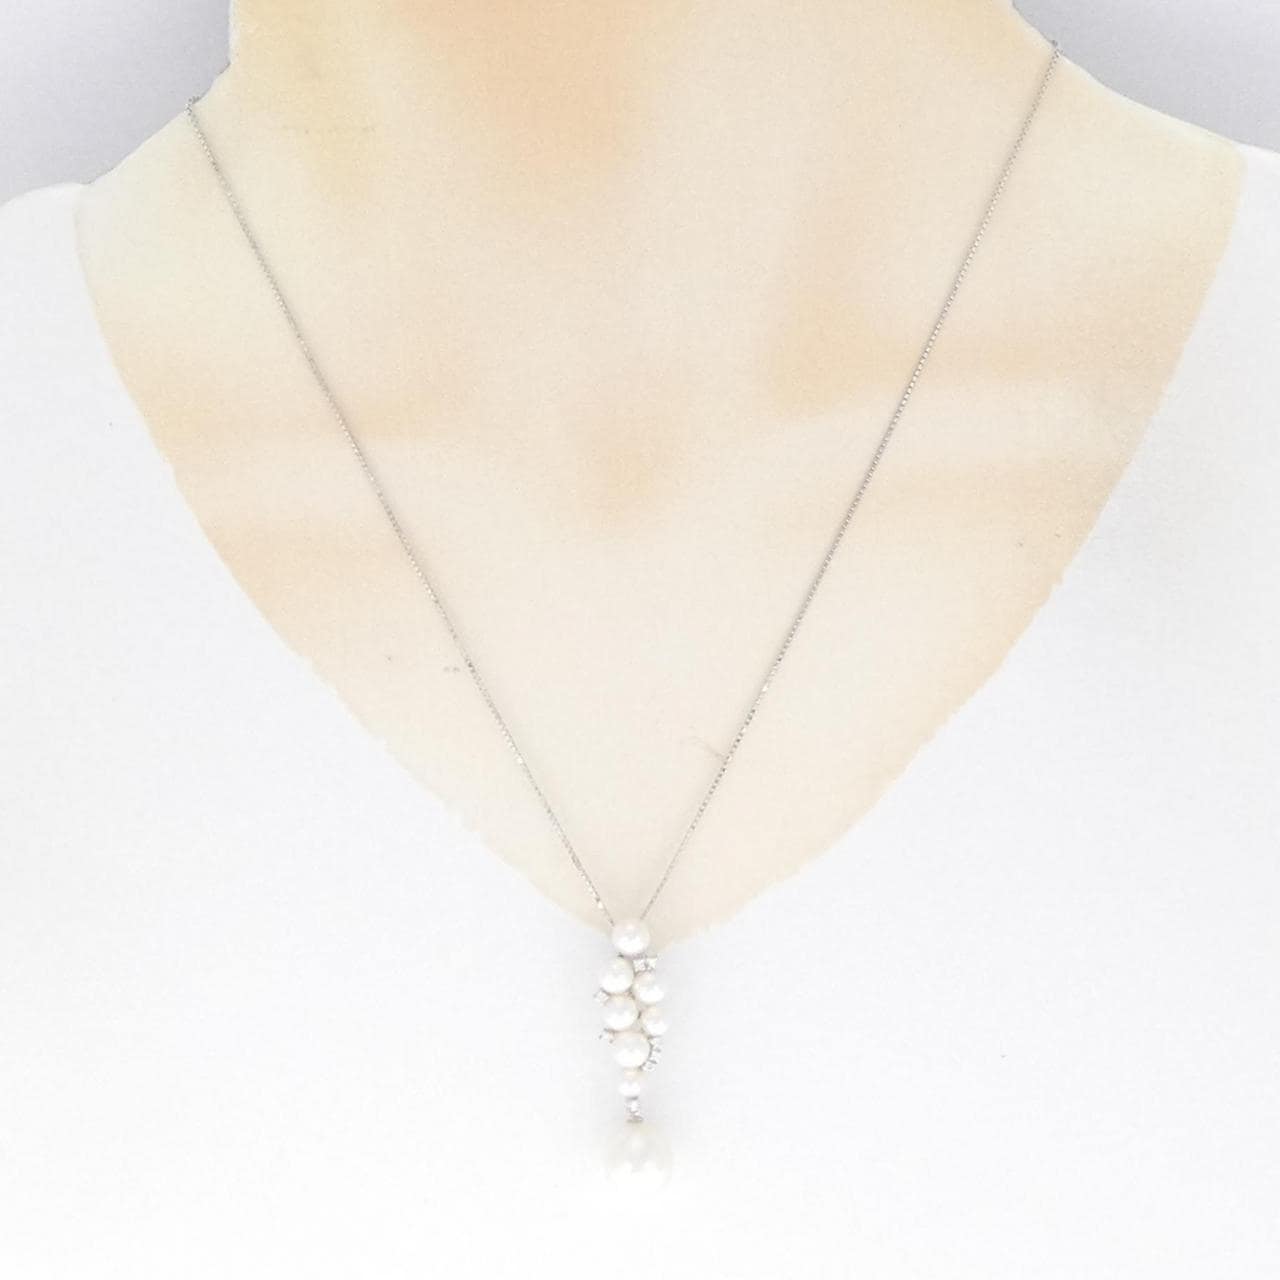 K18WG pearl necklace